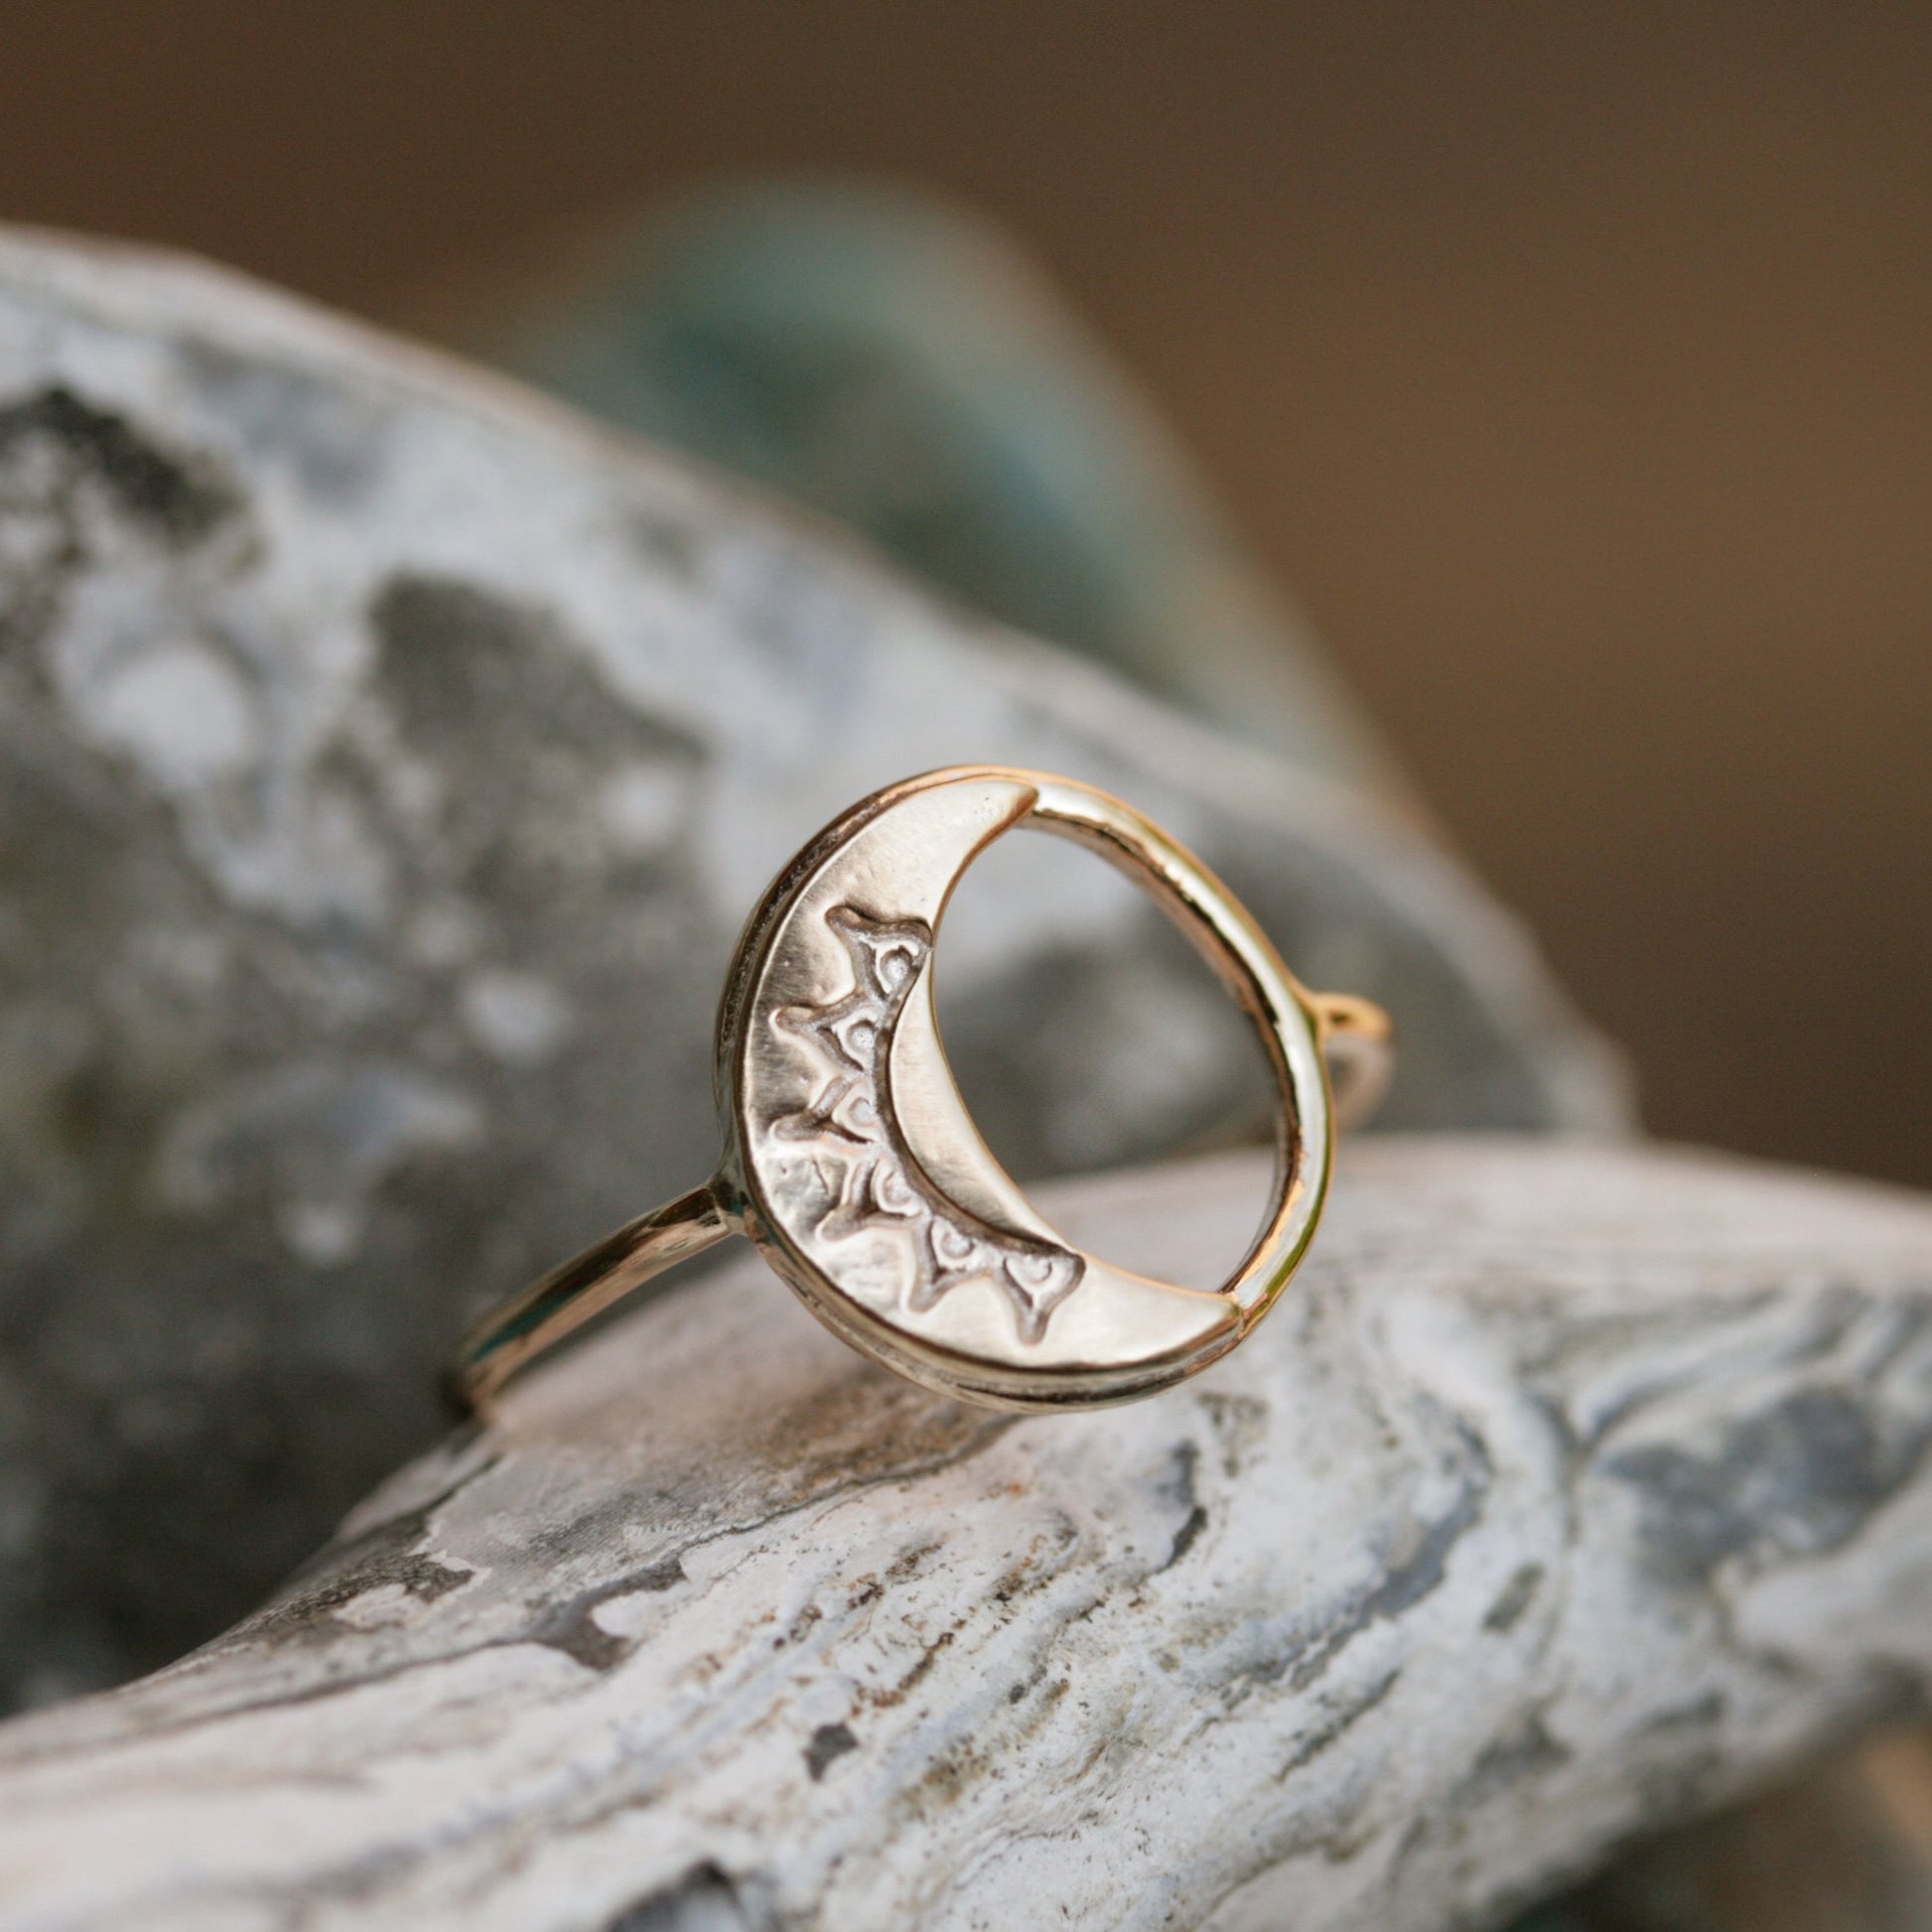 La Lune Ring- Handcrafted Dainty Crescent Moon Ring in Sterling or 10K Sterling Silver